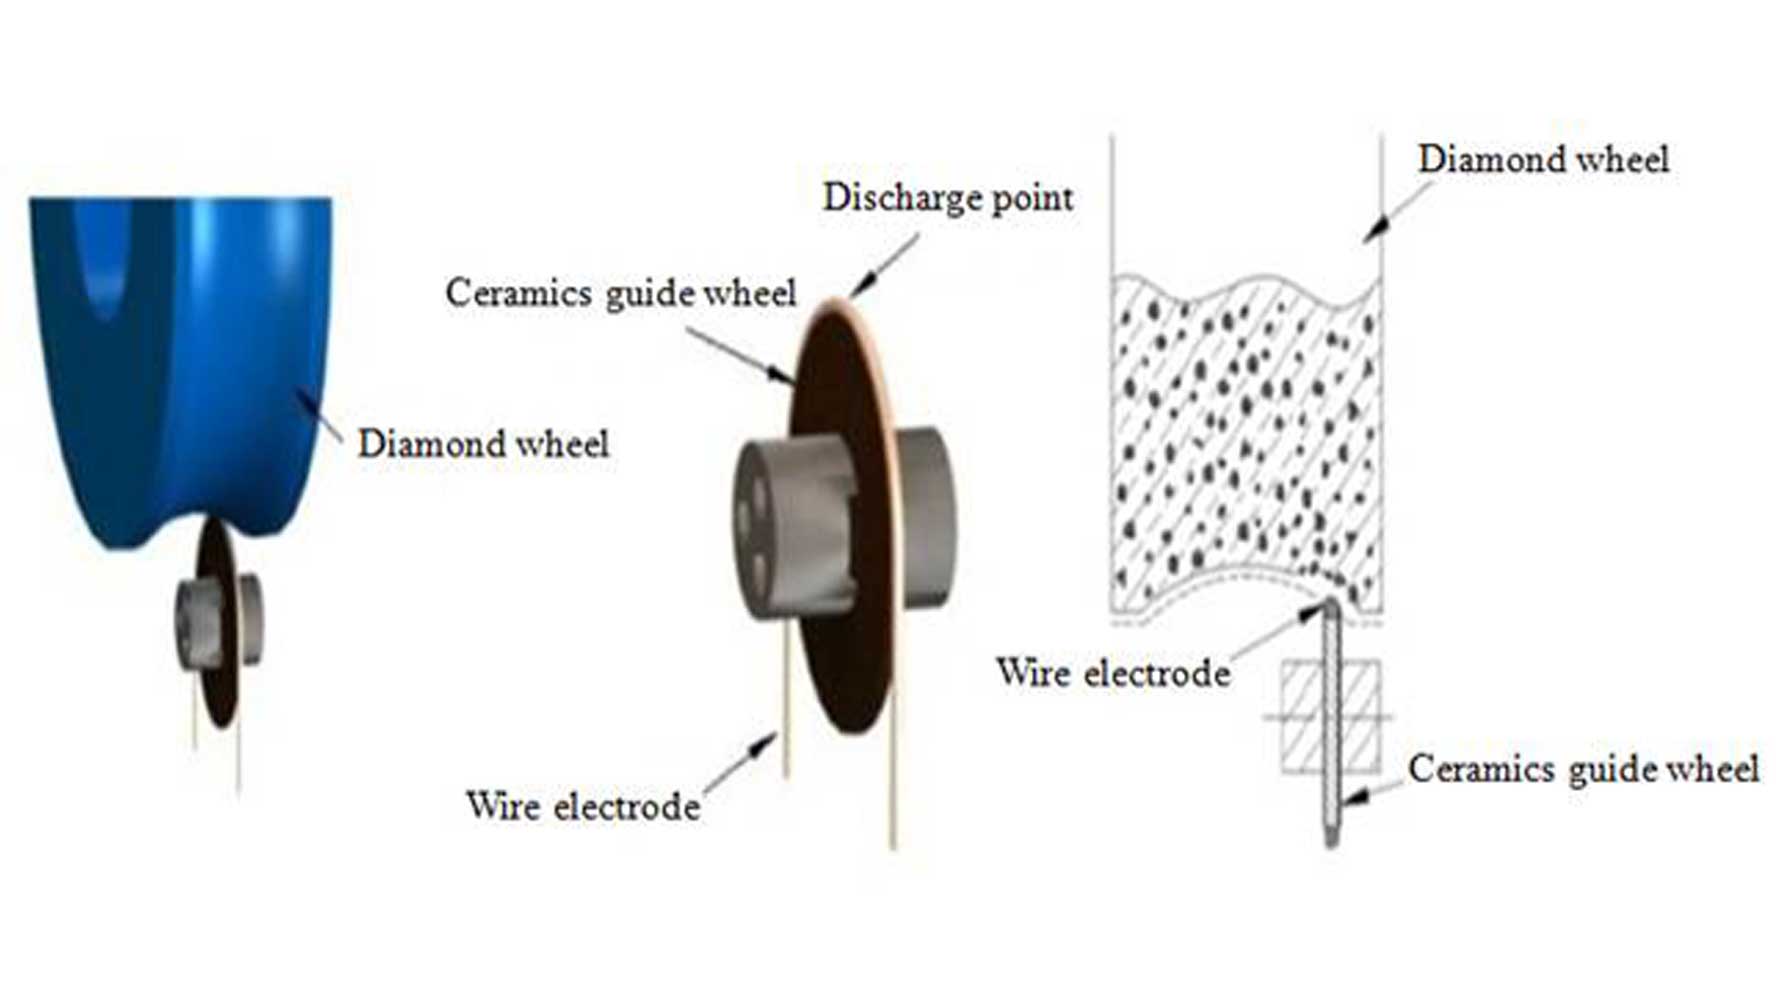 grinding wheel truing and dressing